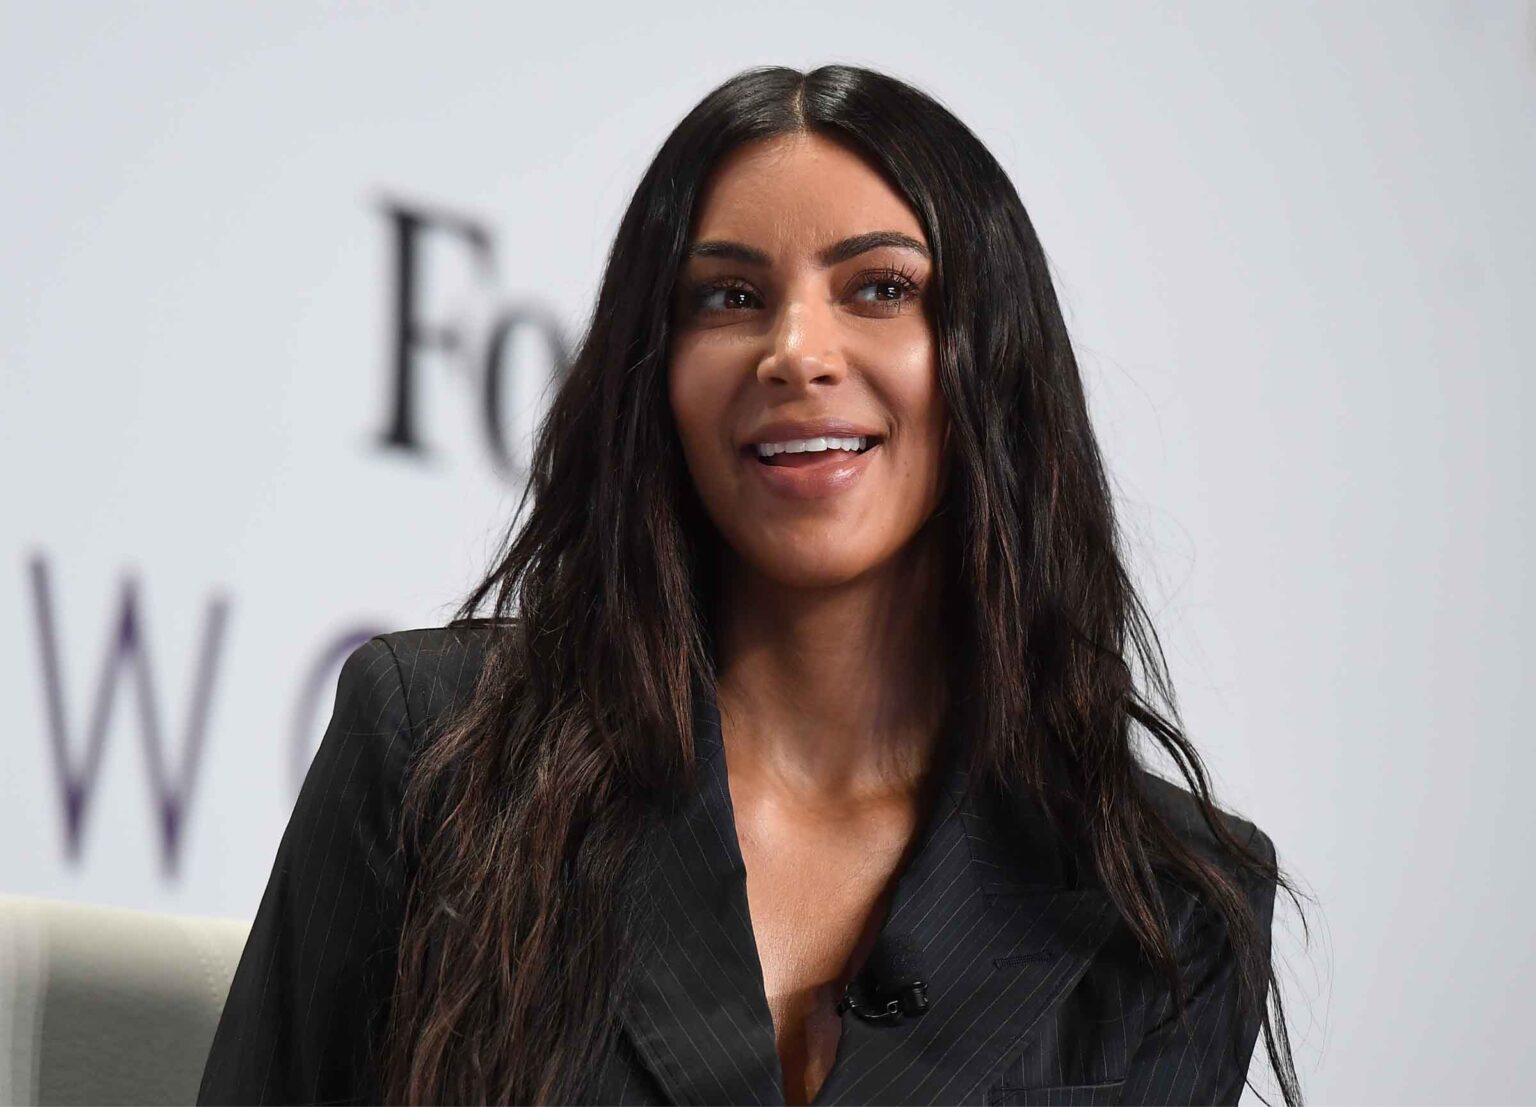 The security team protecting the Kim Kardashian house were tested this week when a man tried to break in. Here's what happened.